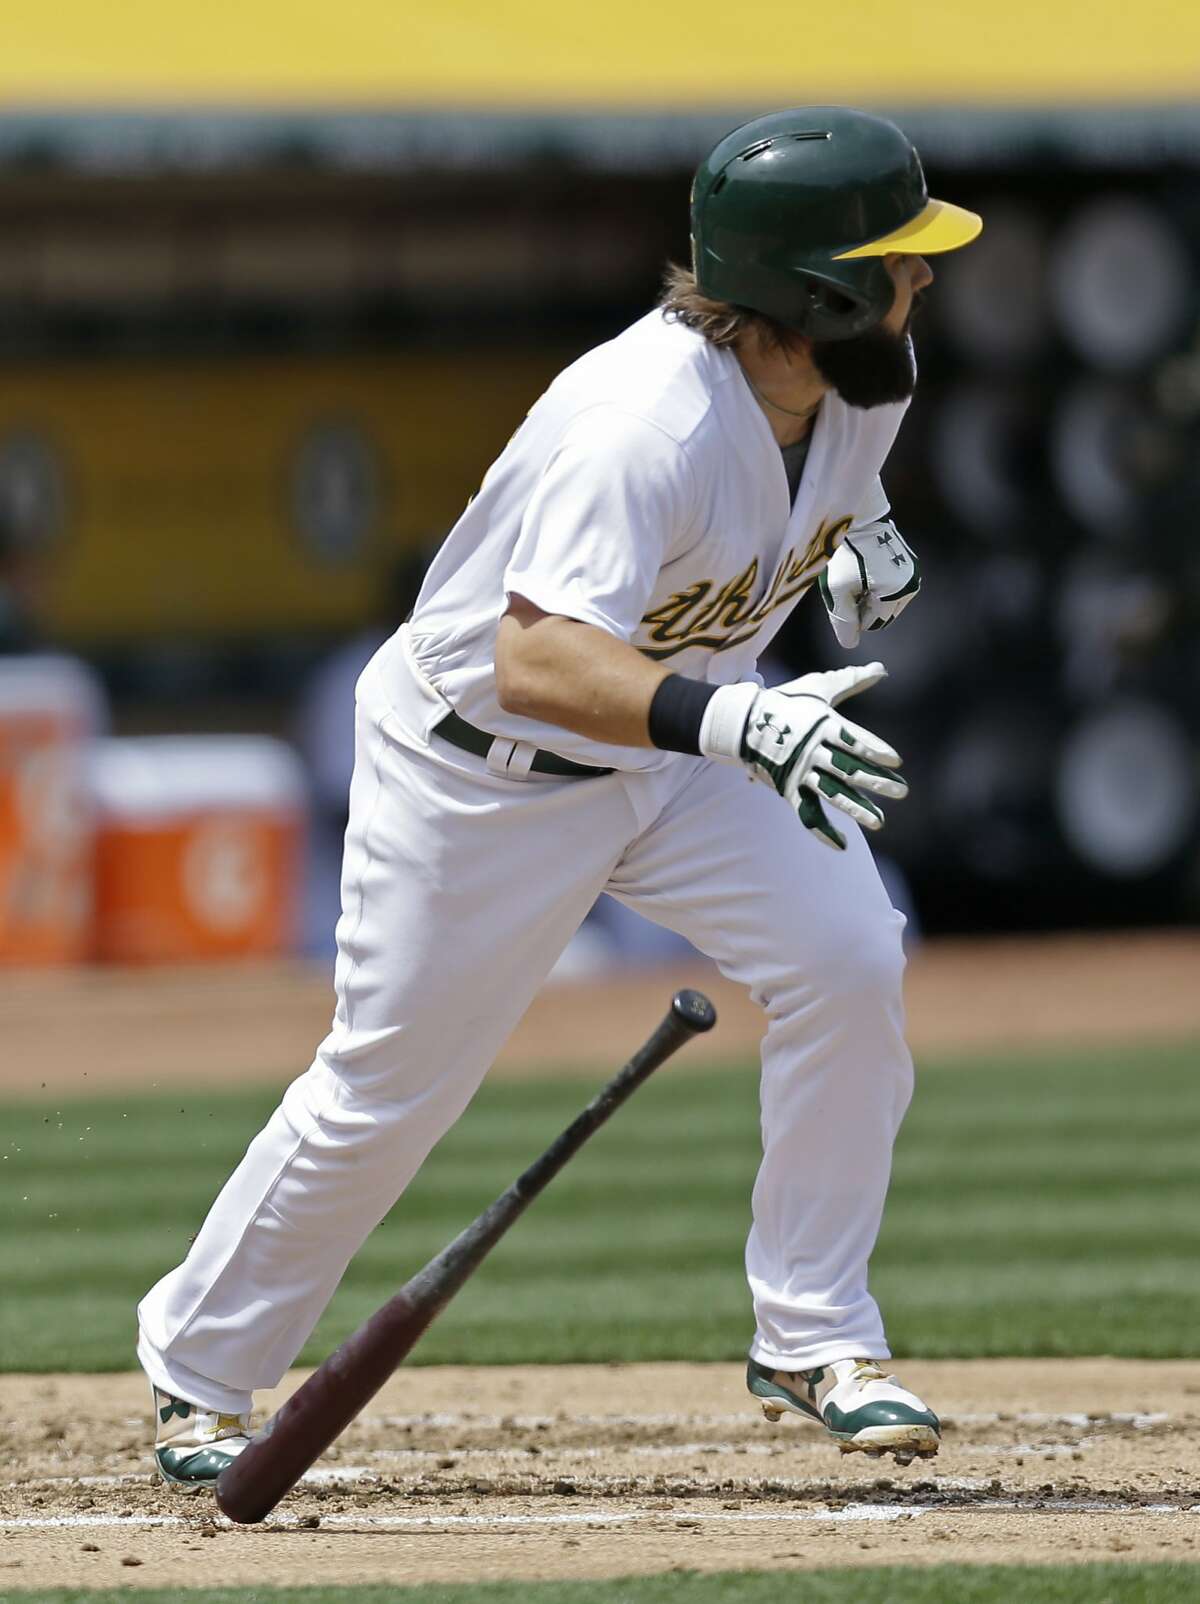 Oakland Athletics' Jaff Decker drops his bat after hitting an RBI single off Houston Astros pitcher Lance McCullers Jr. in the second inning of a baseball game Saturday, April 15, 2017, in Oakland, Calif. (AP Photo/Ben Margot)